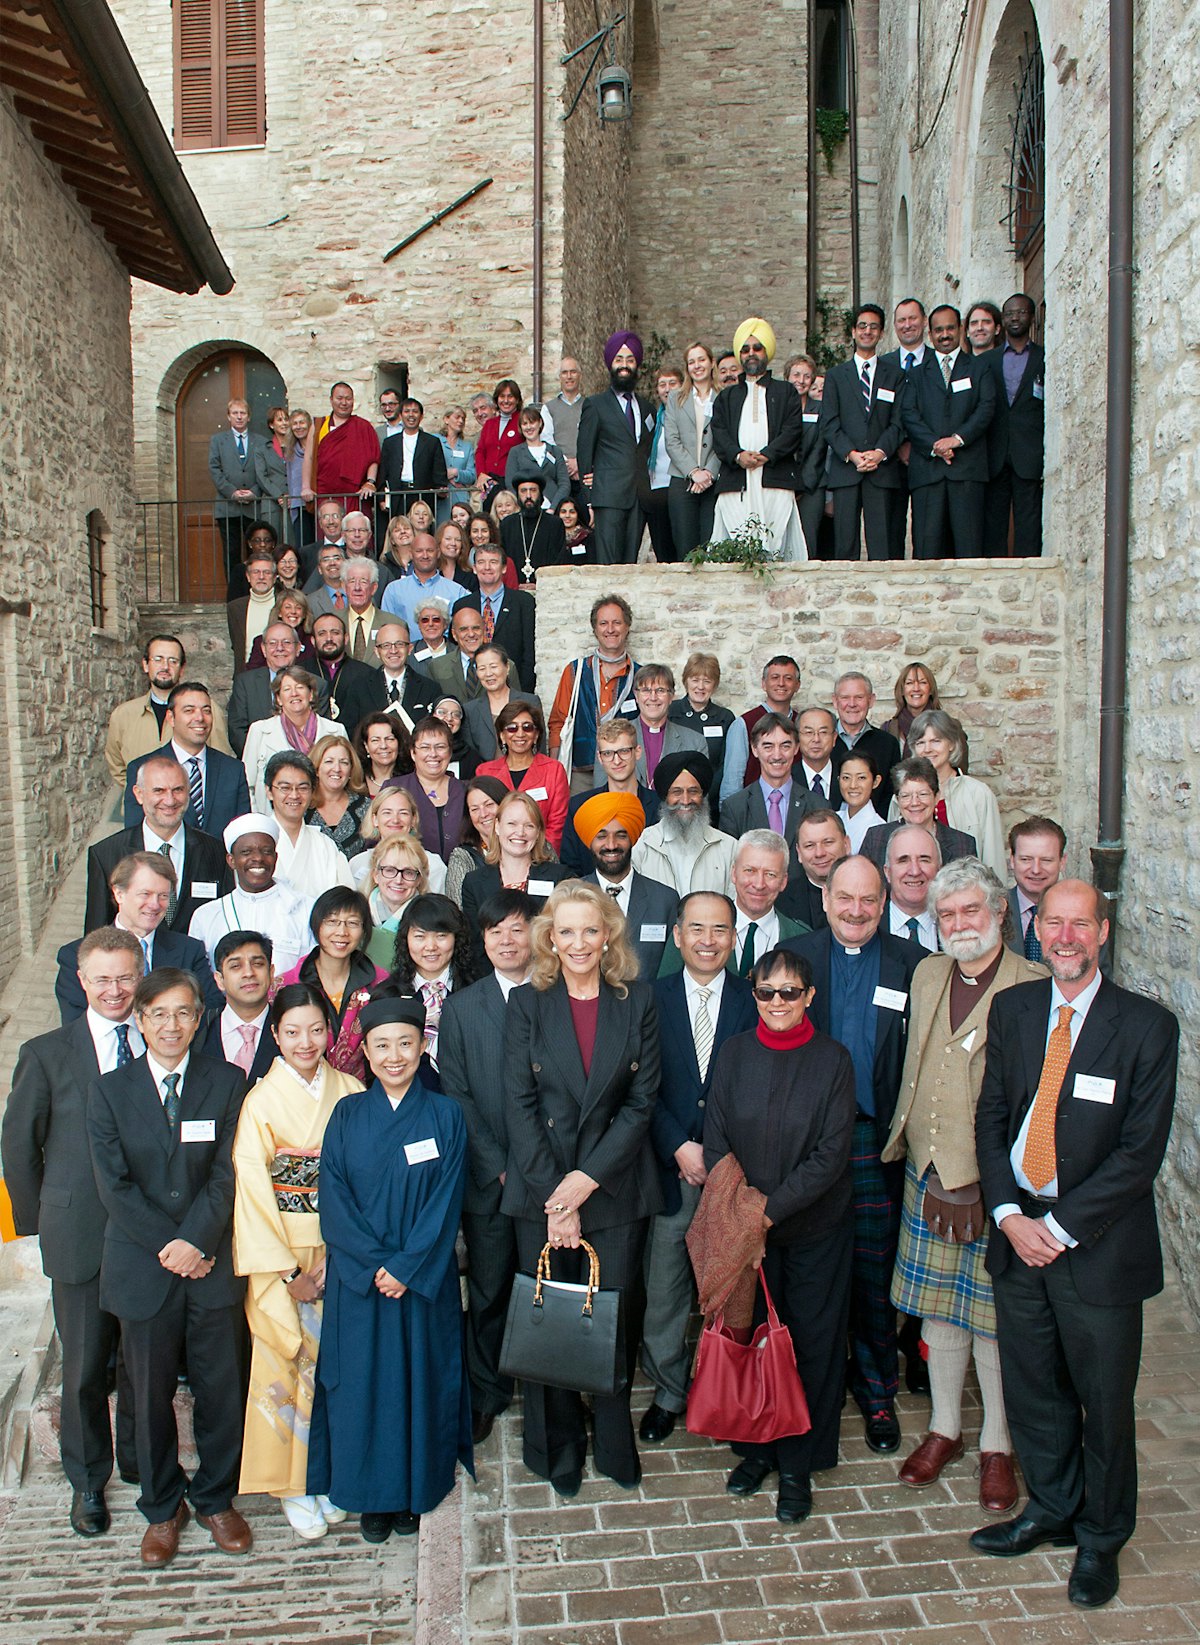 Founder members and friends of the Green Pilgrimage Network, launched at Assisi, Italy, in a celebration organised by the Alliance of Religions and Conservation (ARC) in association with WWF, on 1 November 2011. Photograph: ARC/Katia Marsh.